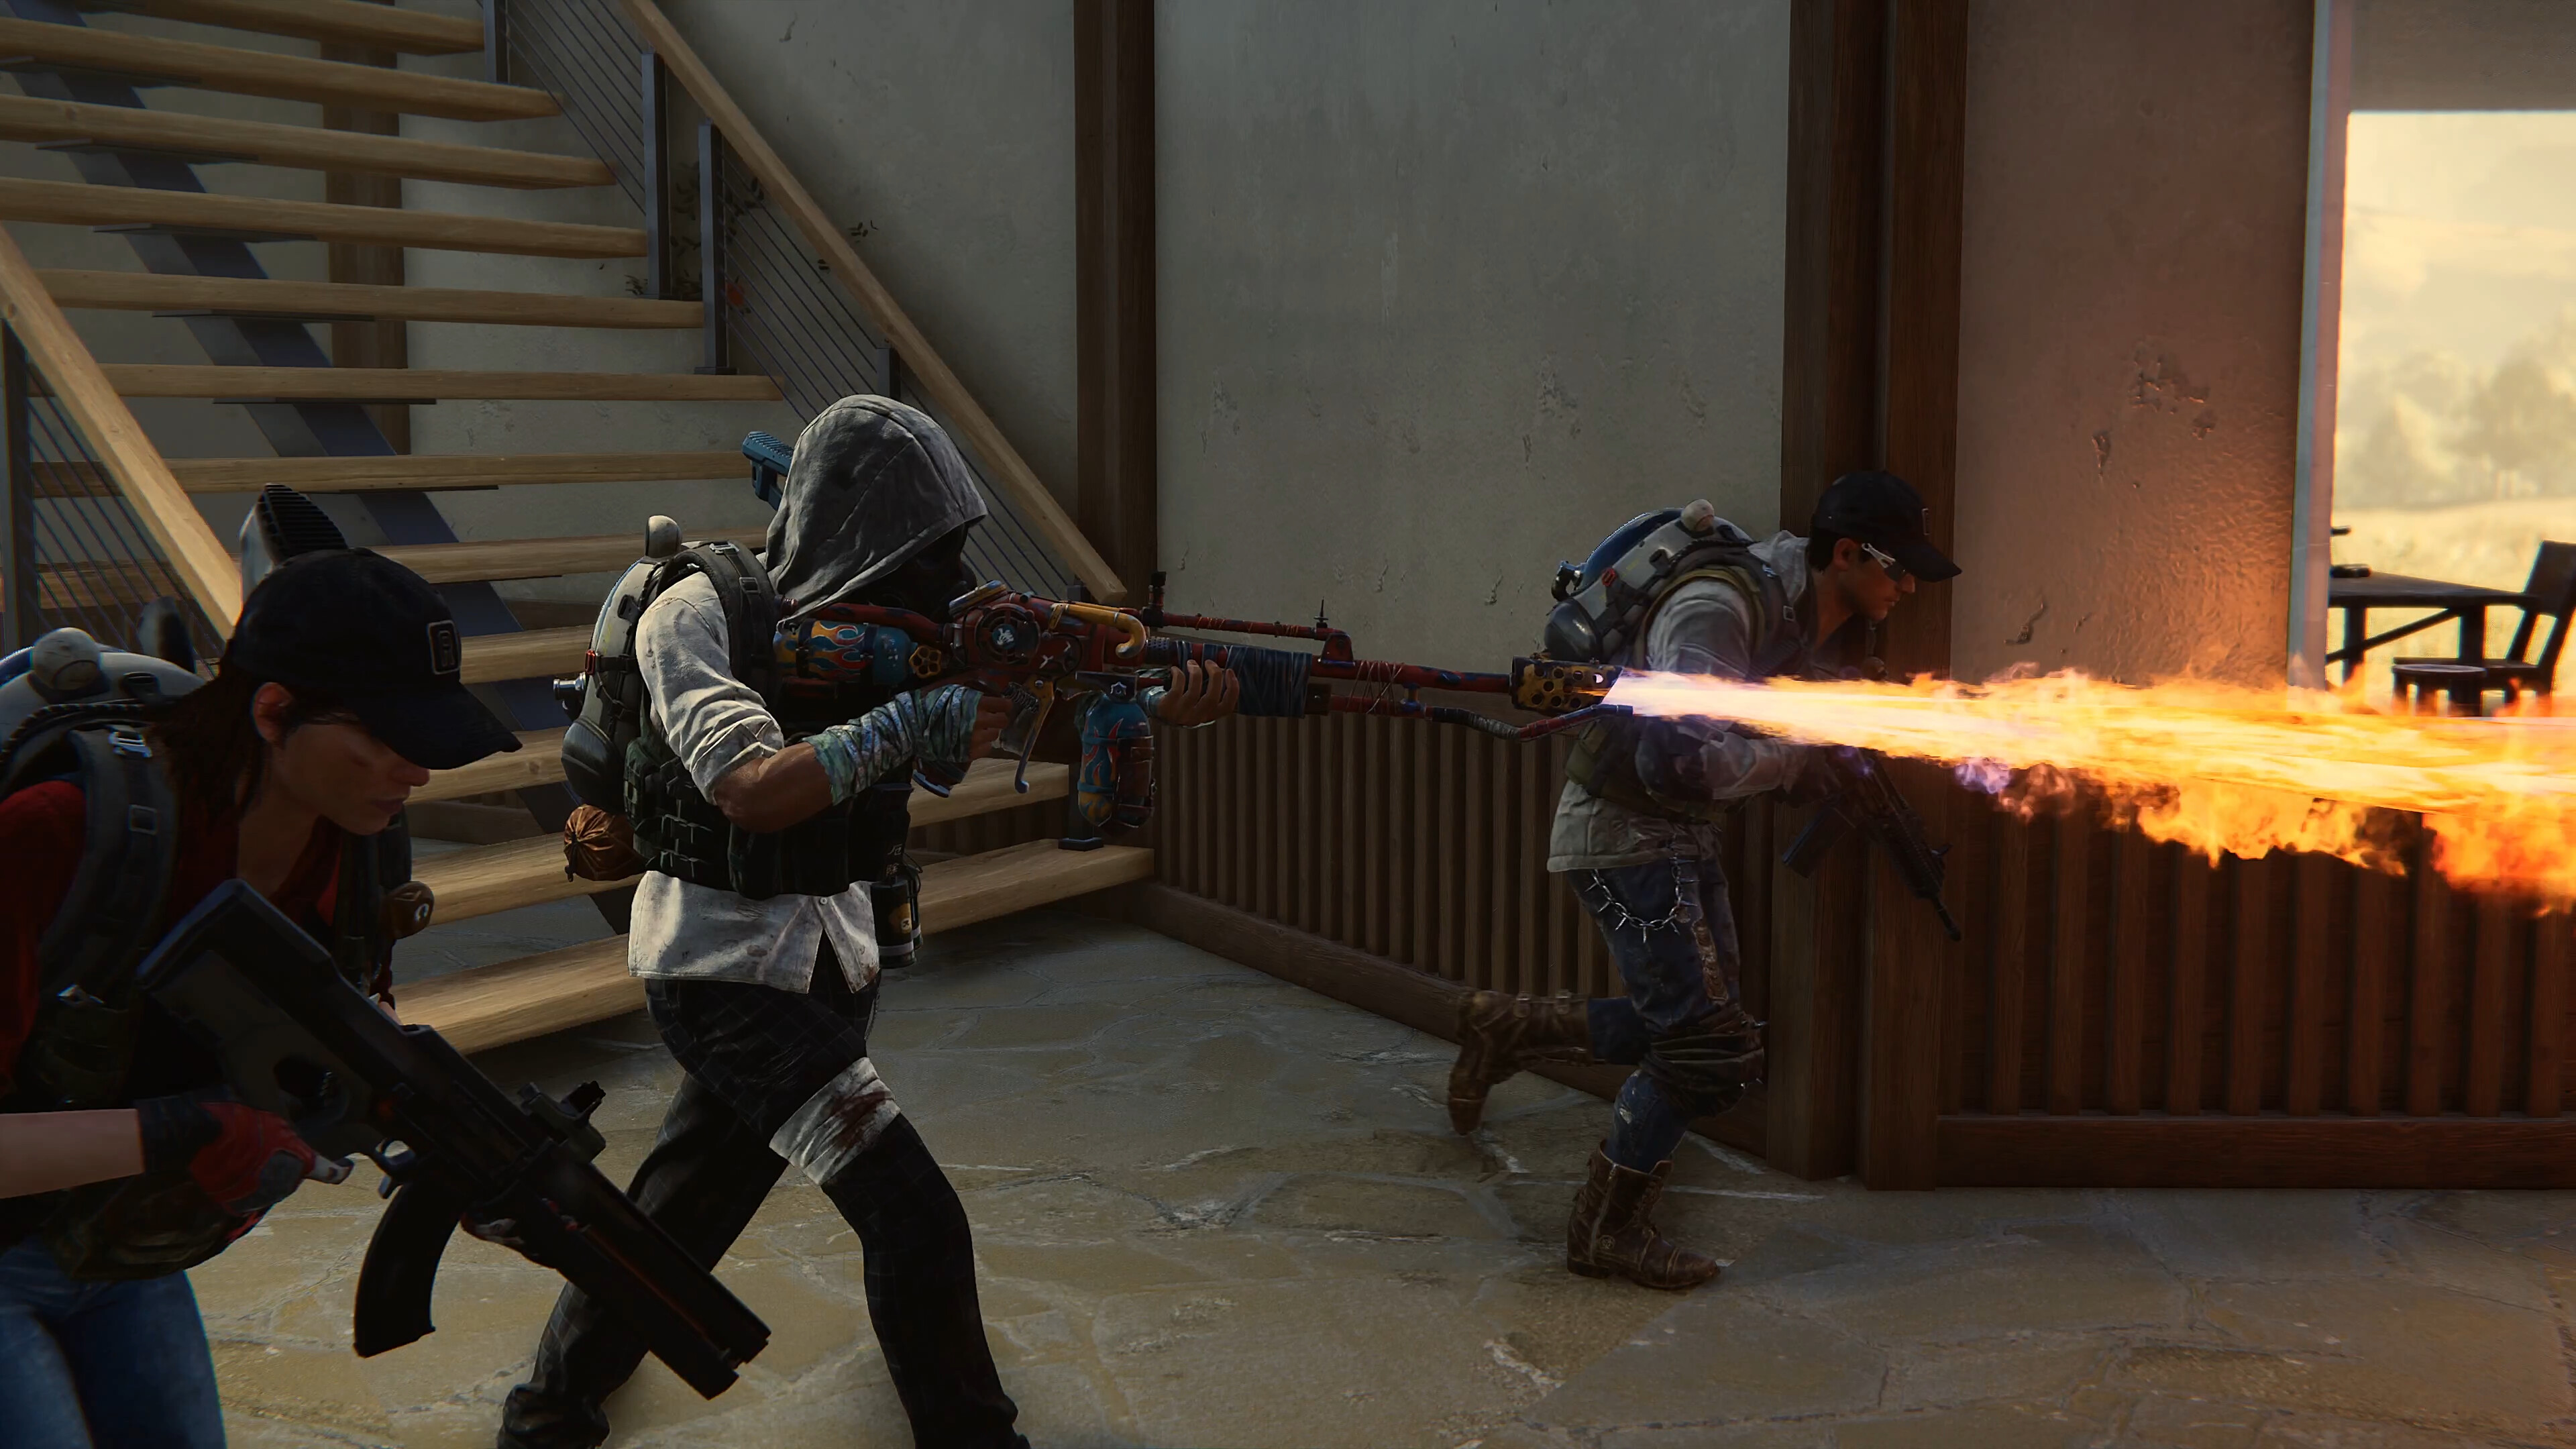 Attacking with a flamethrower in Once Human